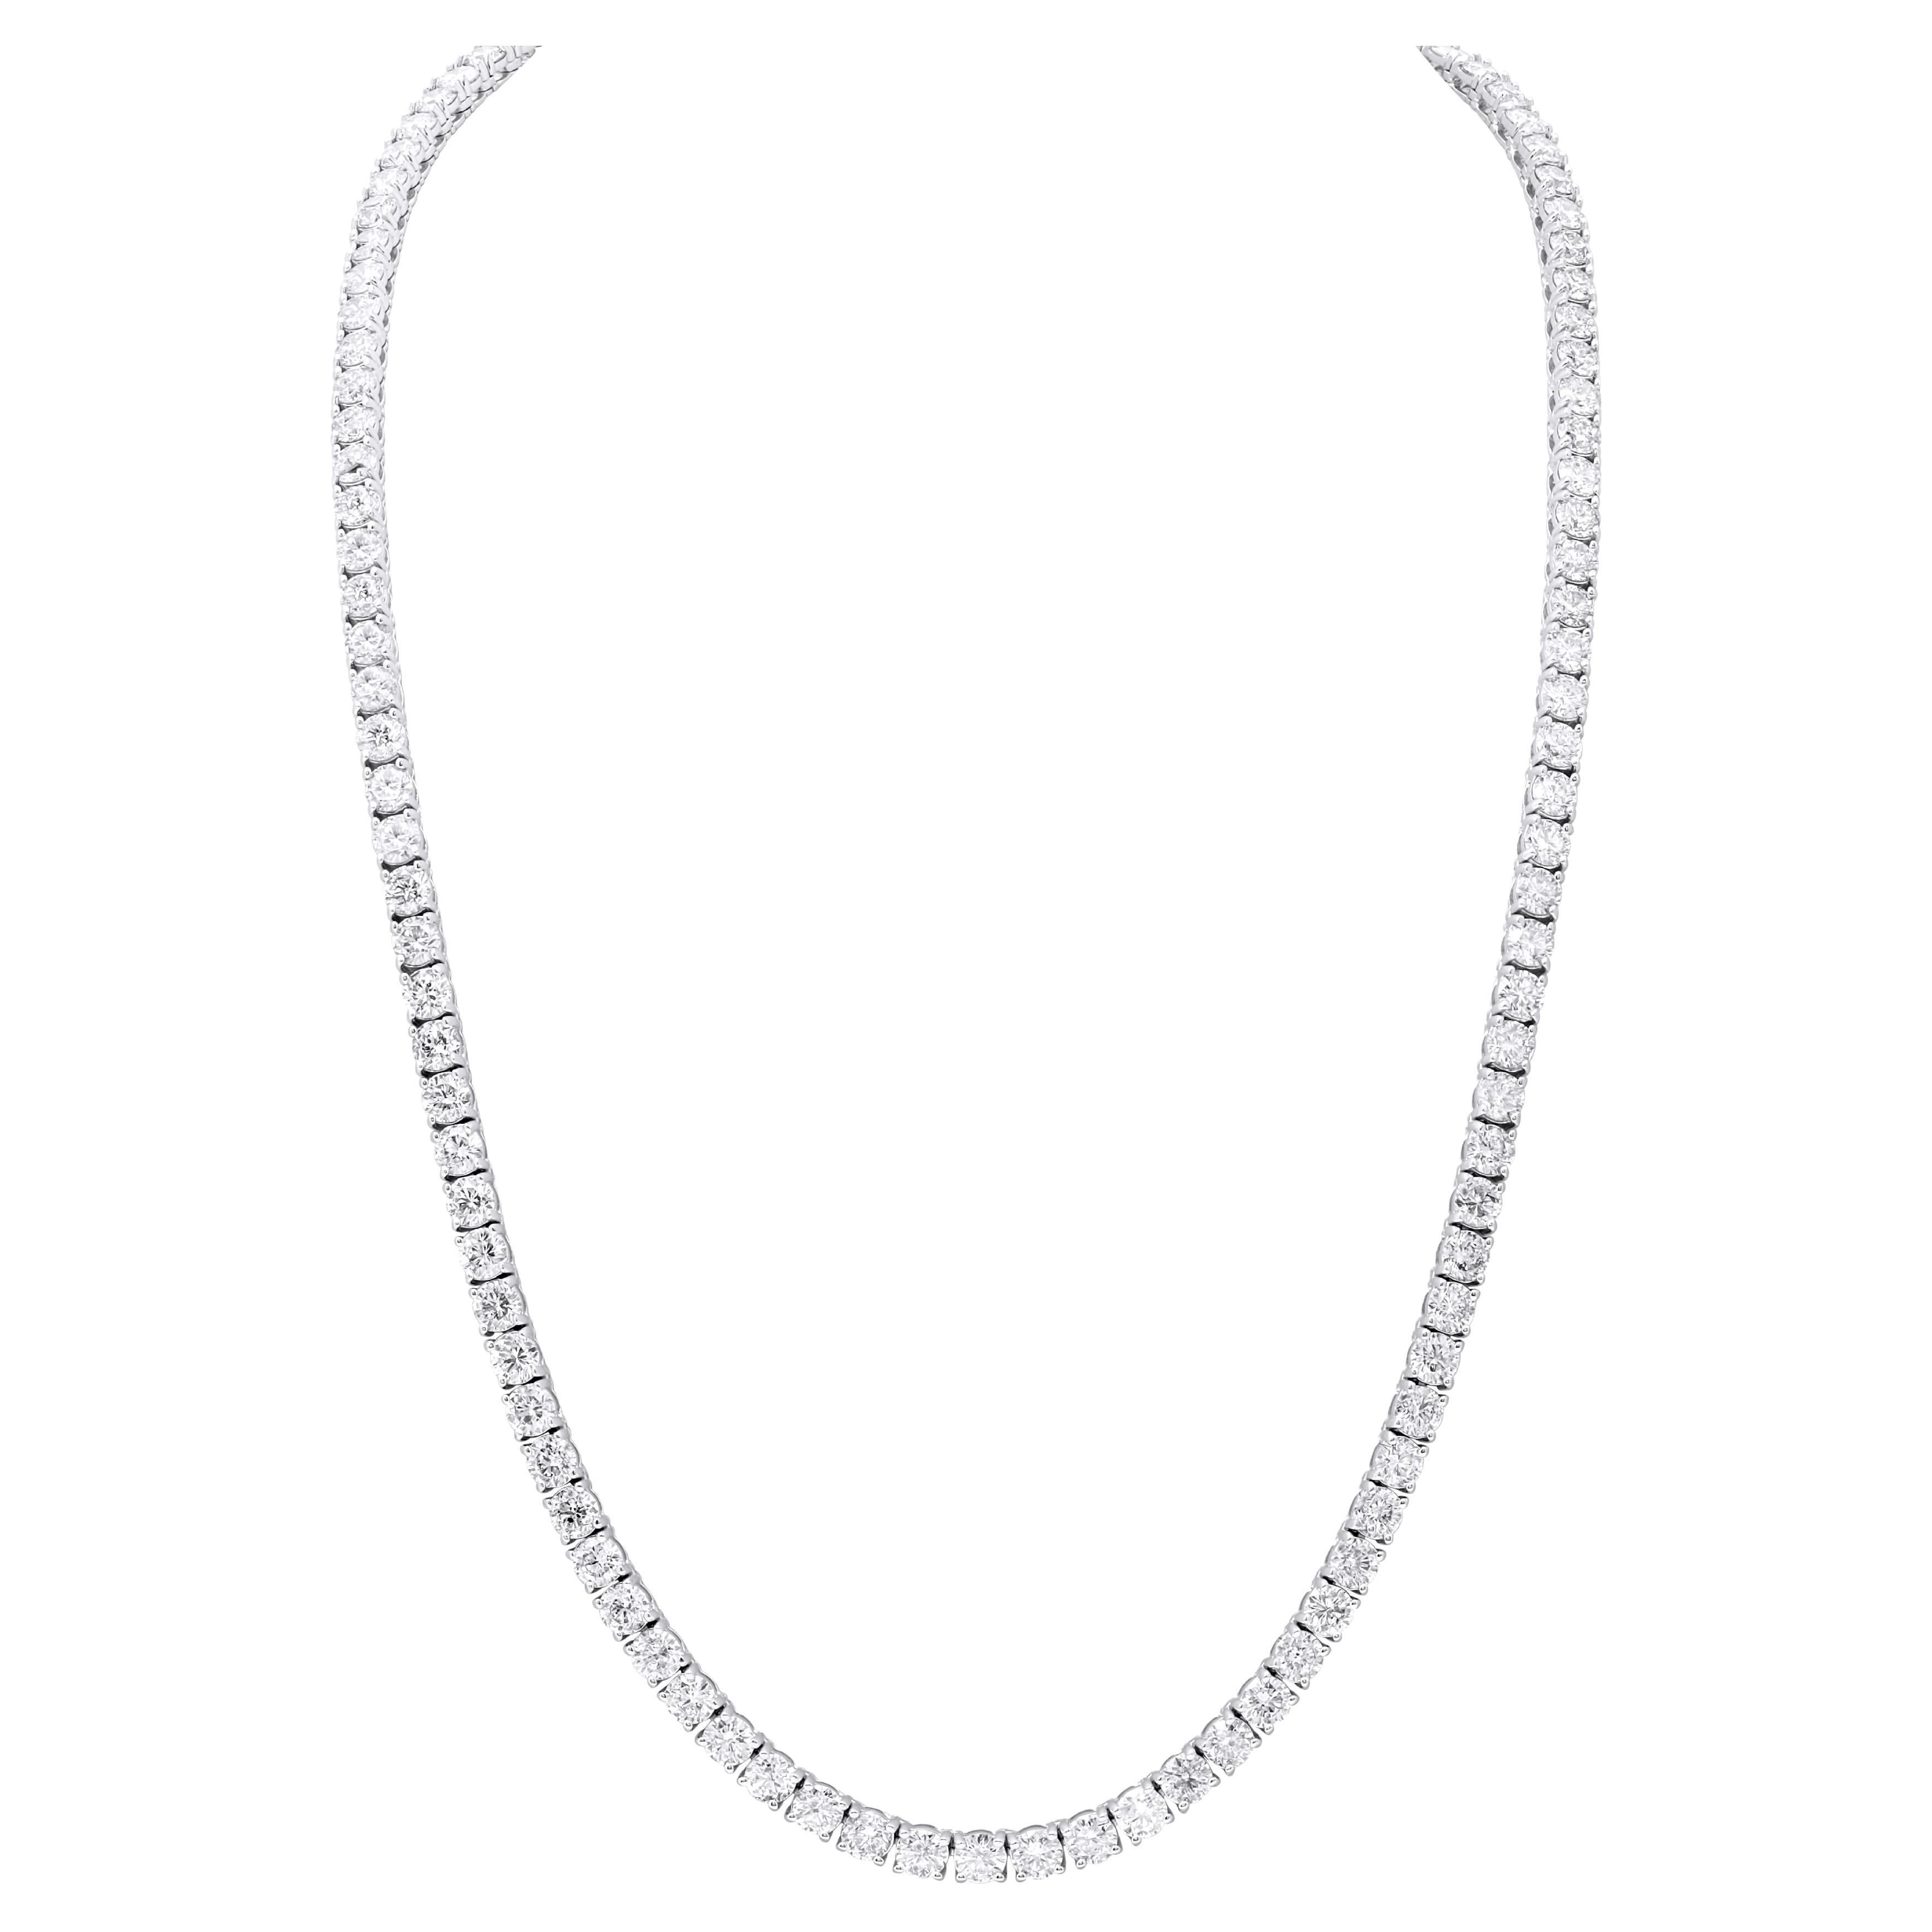 Diana M. 11.45 Cts Round Diamond 4 Prong Tennis Necklace 14k White Gold  For Sale